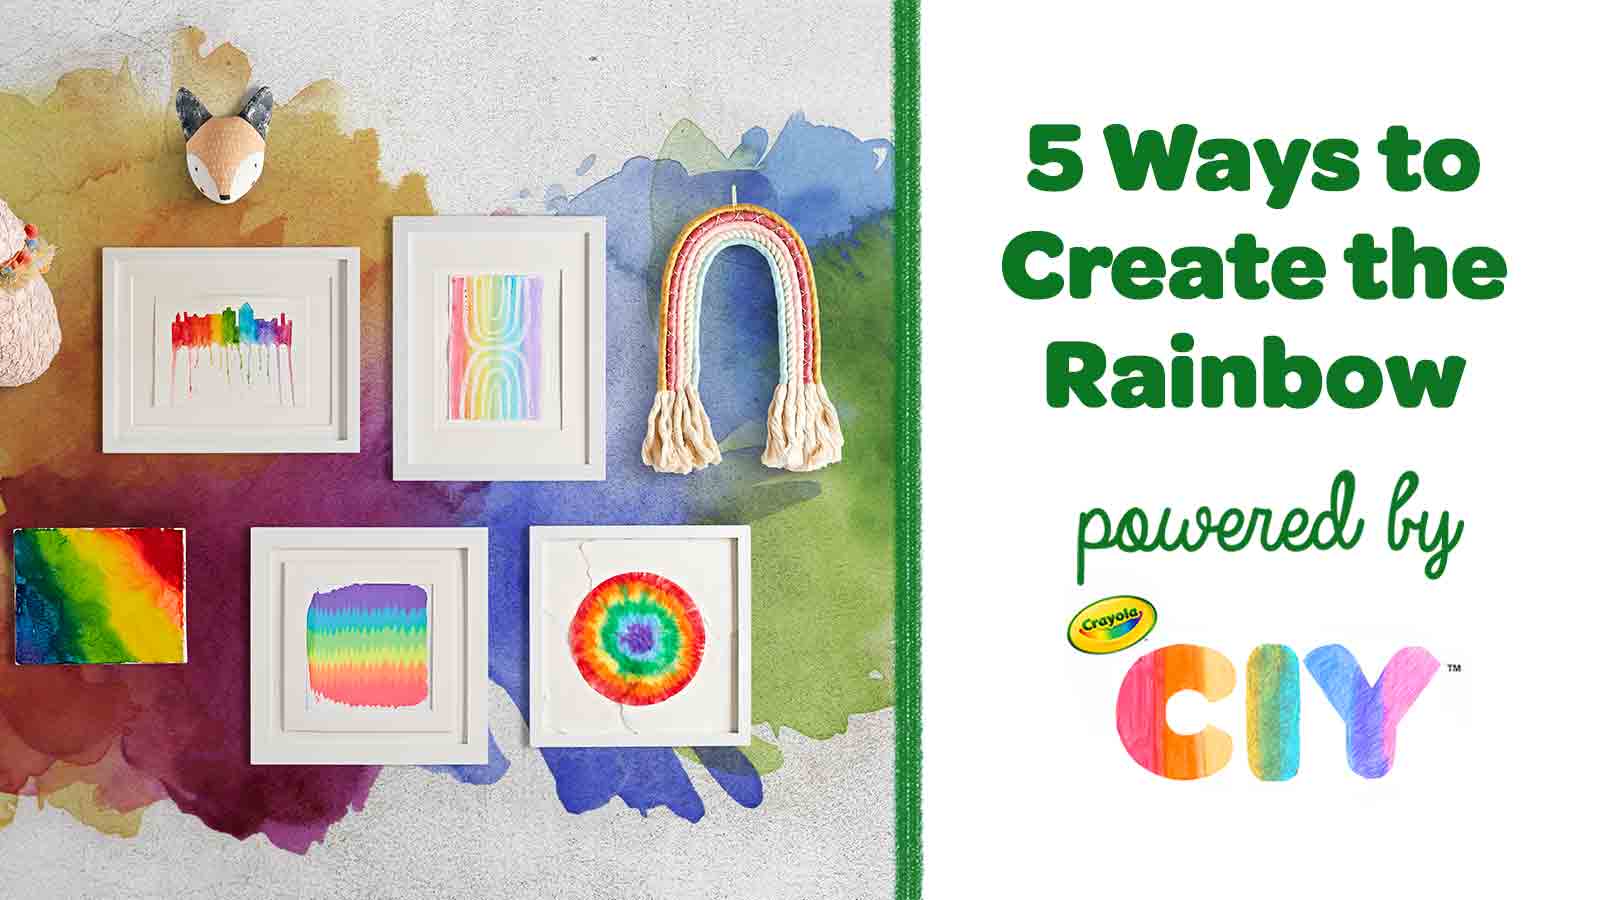 https://www.crayola.com/-/media/Crafts-New/Poster-Frames/5-Ways-to-Create-the-Rainbow_Poster-Frame_Template/5-Ways-to-Create-the-Rainbow_Poster-Frame.jpg